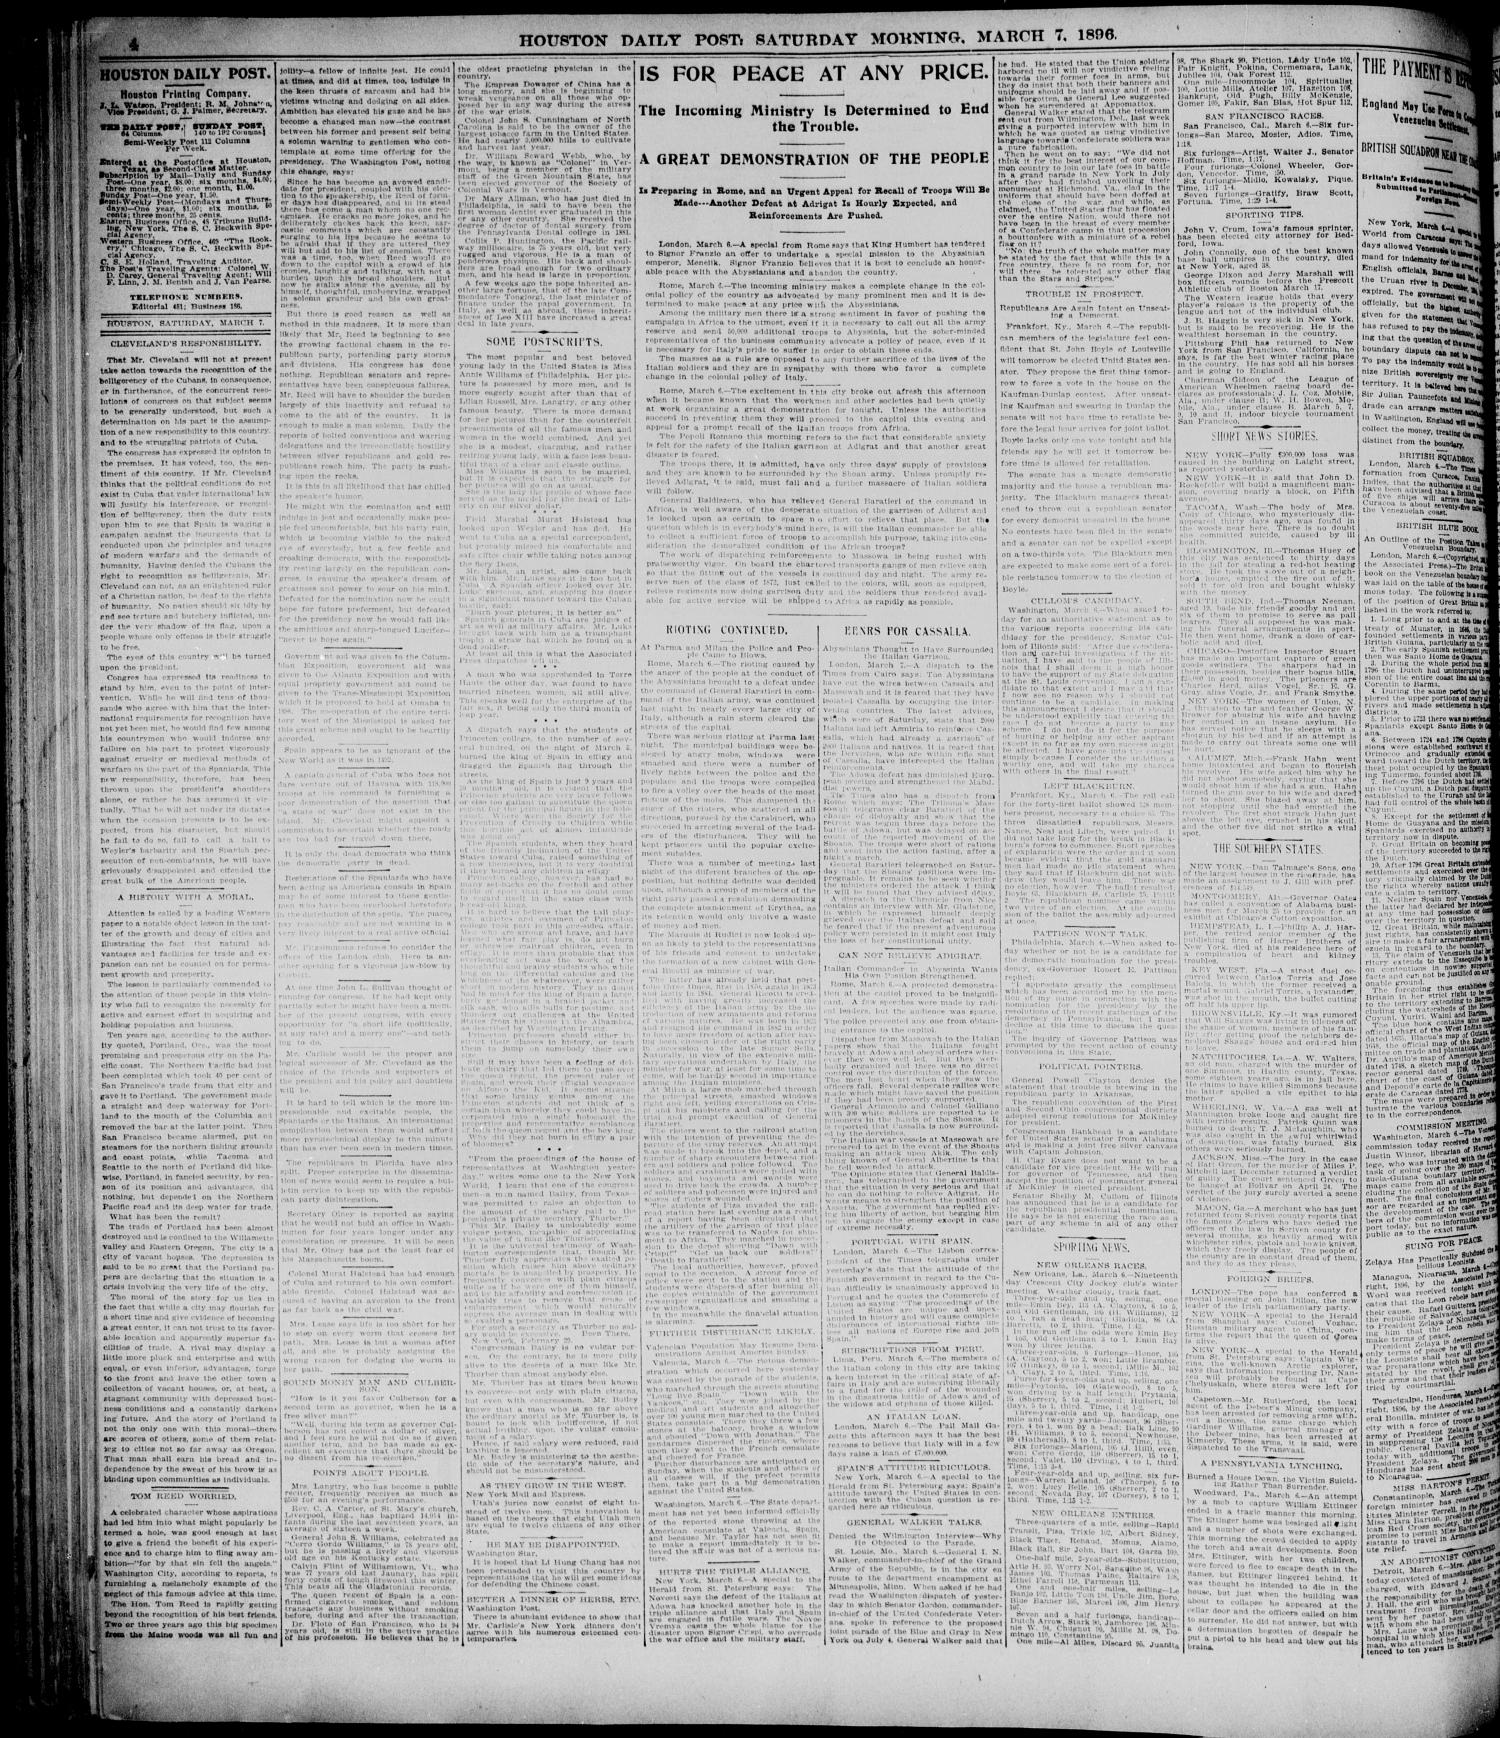 The Houston Daily Post (Houston, Tex.), Vol. ELEVENTH YEAR, No. 338, Ed. 1, Saturday, March 7, 1896
                                                
                                                    [Sequence #]: 4 of 8
                                                